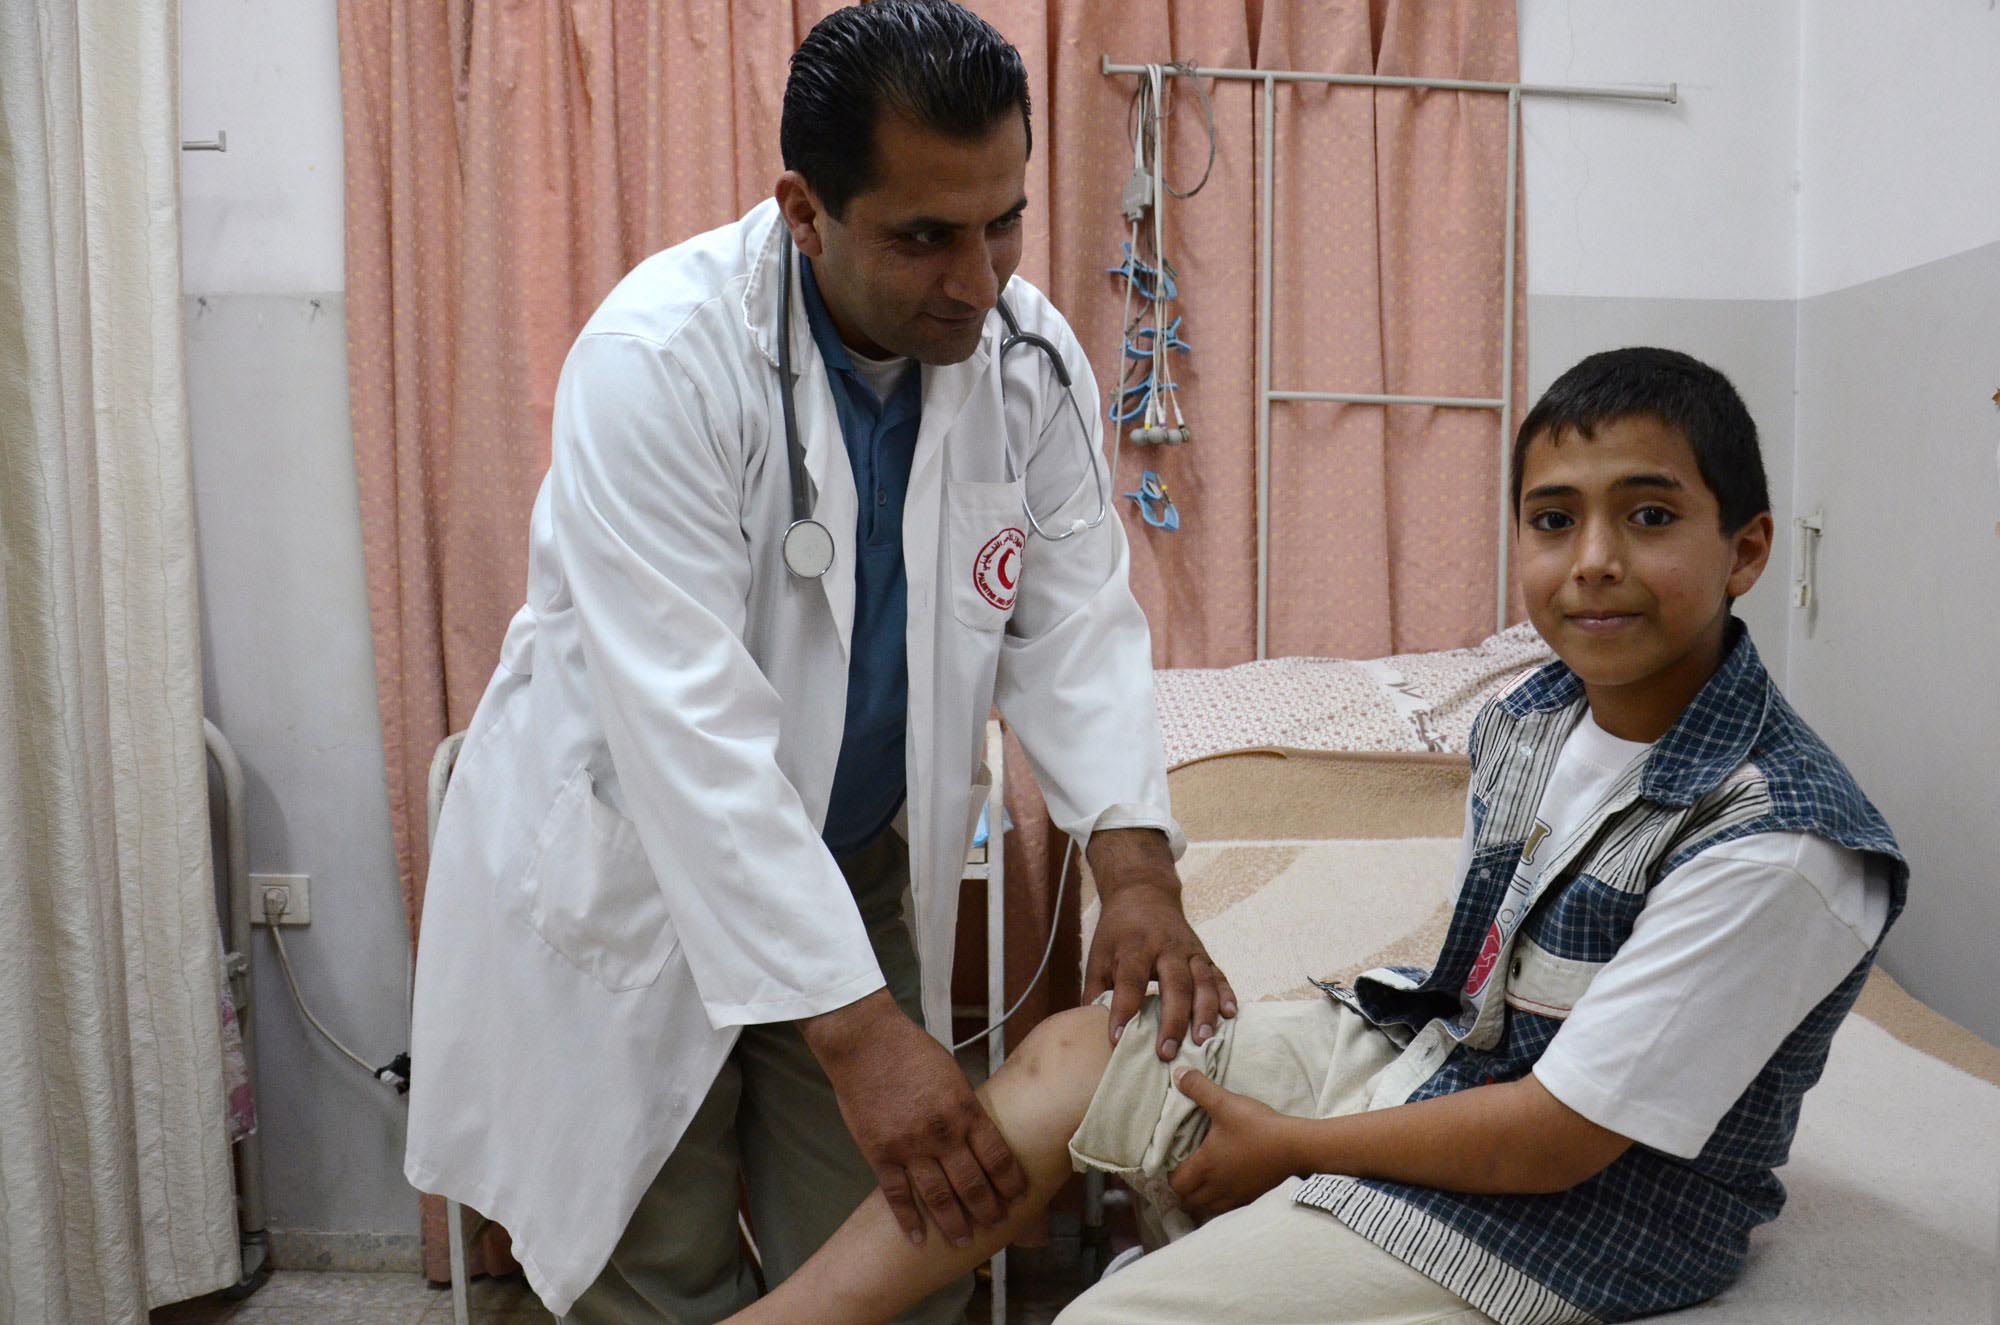 Haitham's leg muscle pain is relieved with donated medicines delivered by Anera.